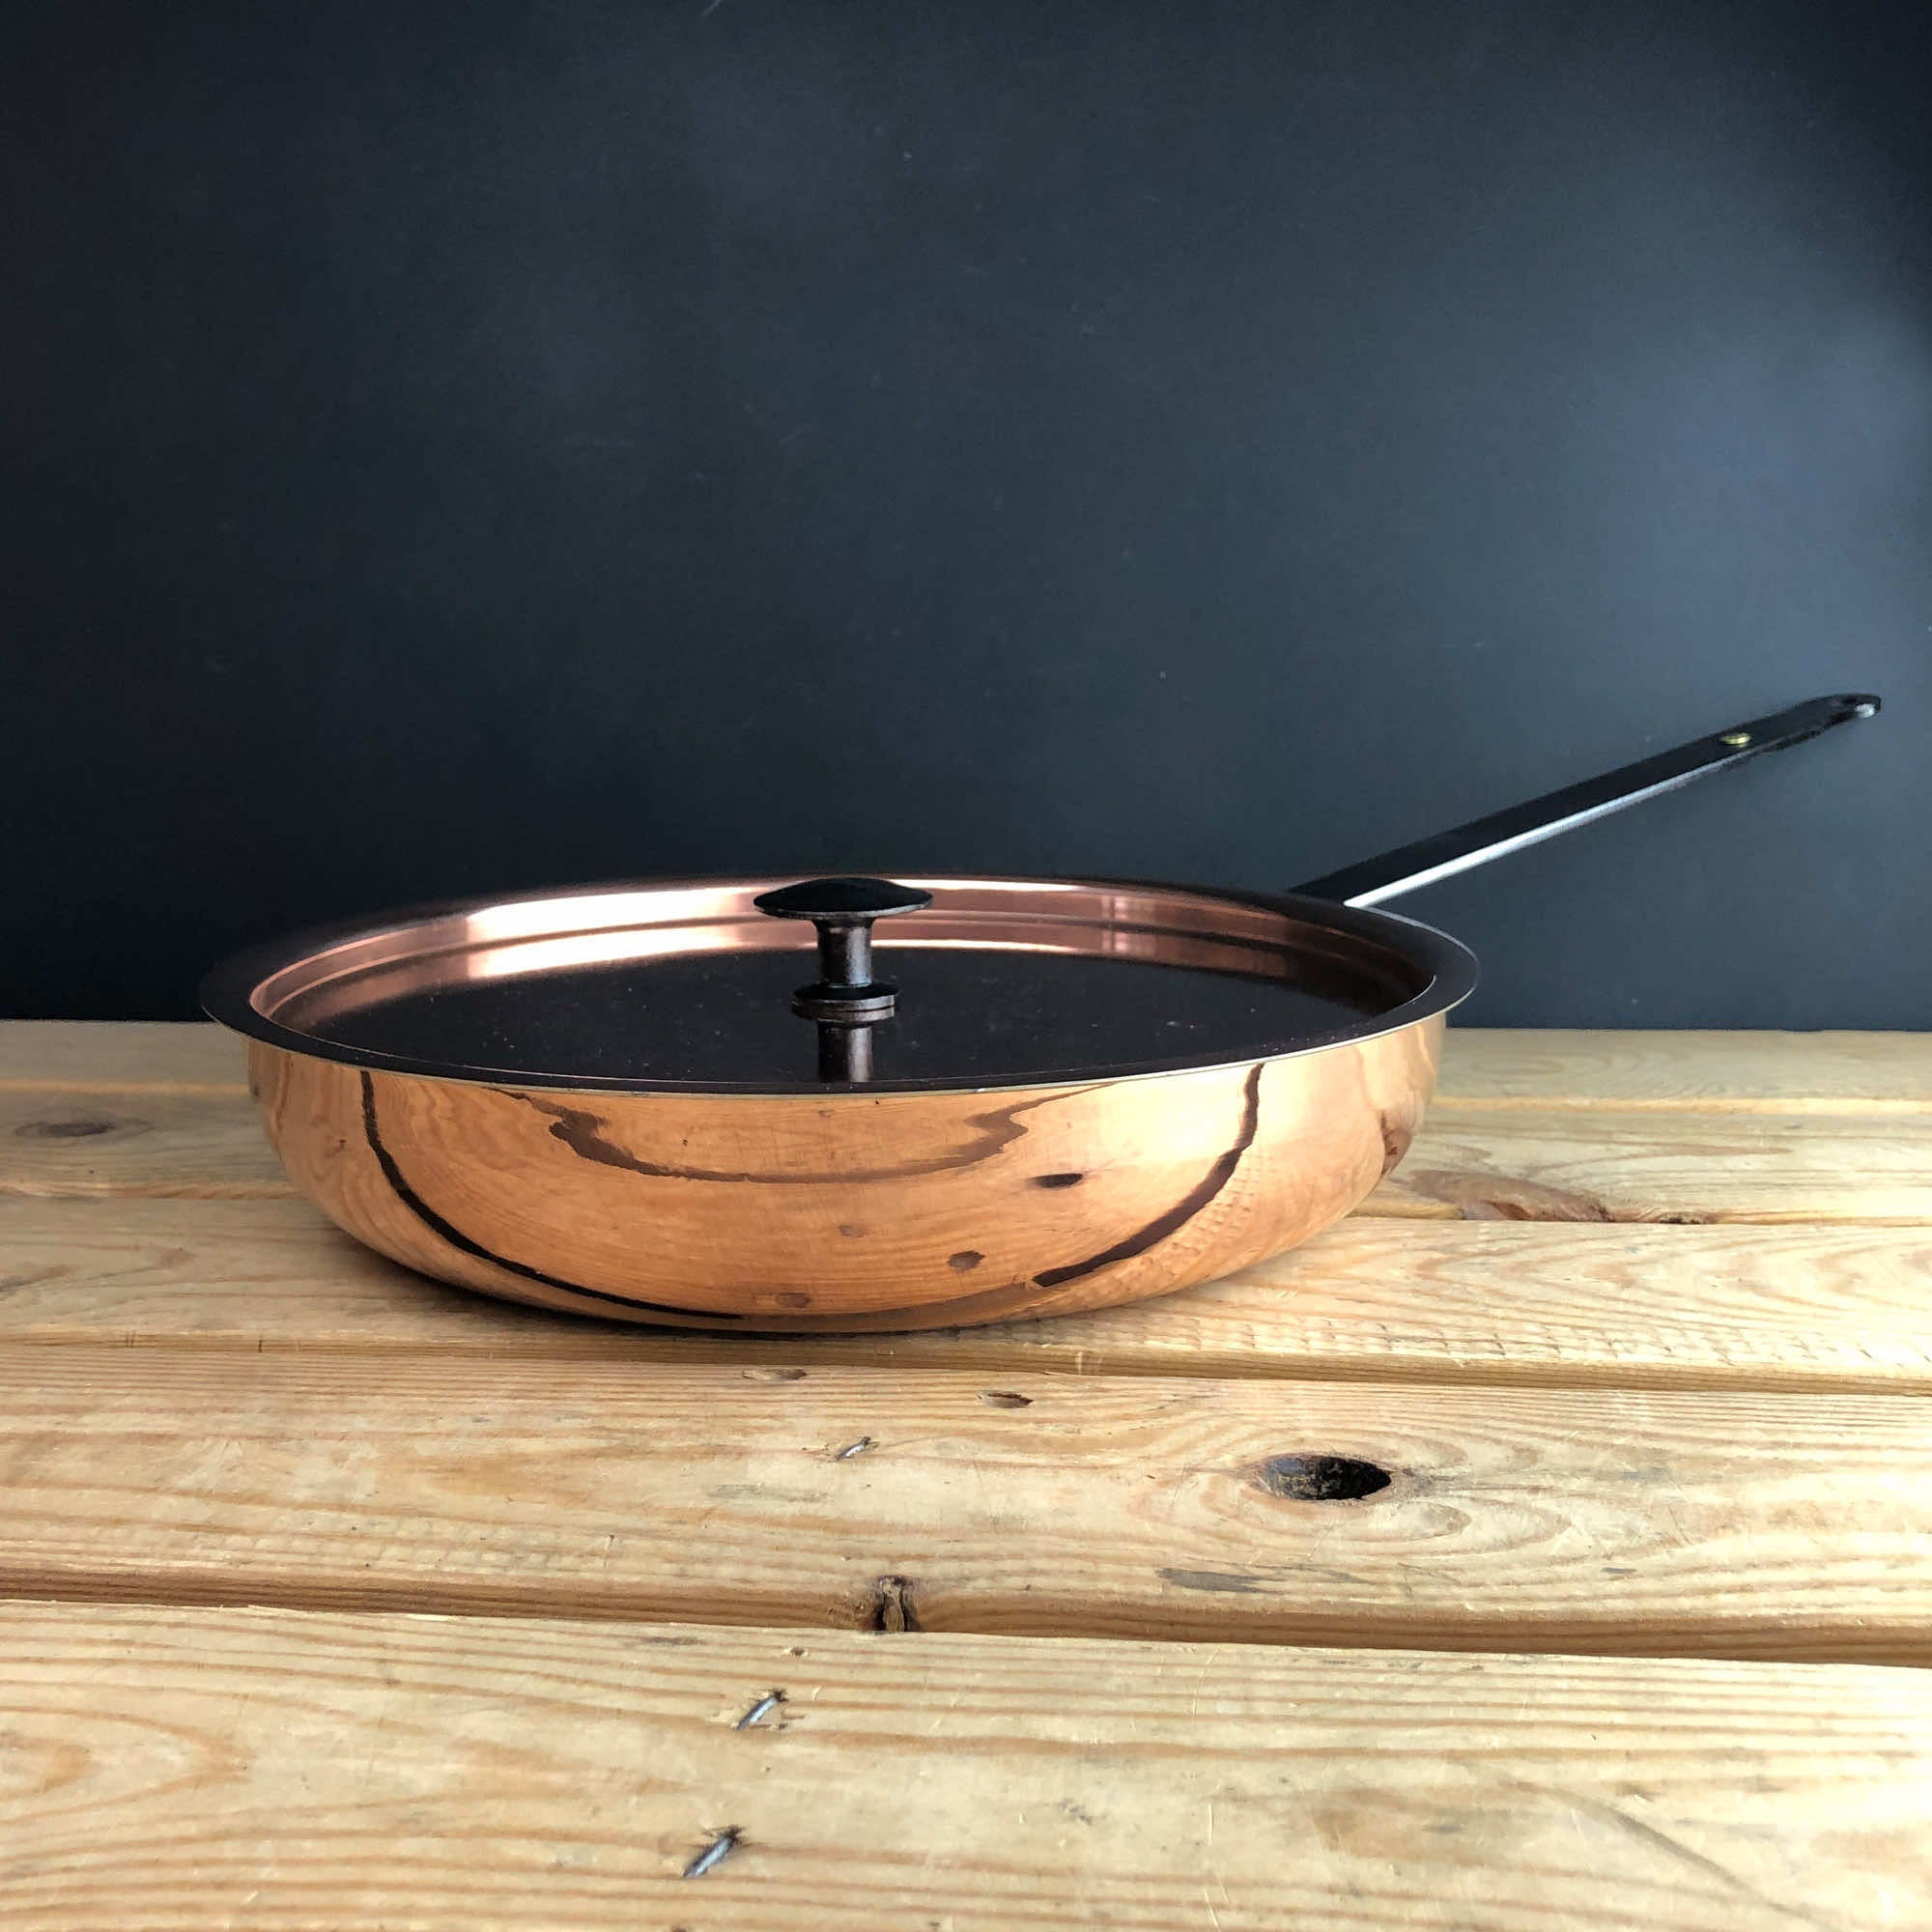 Copper frying pan with lid on table